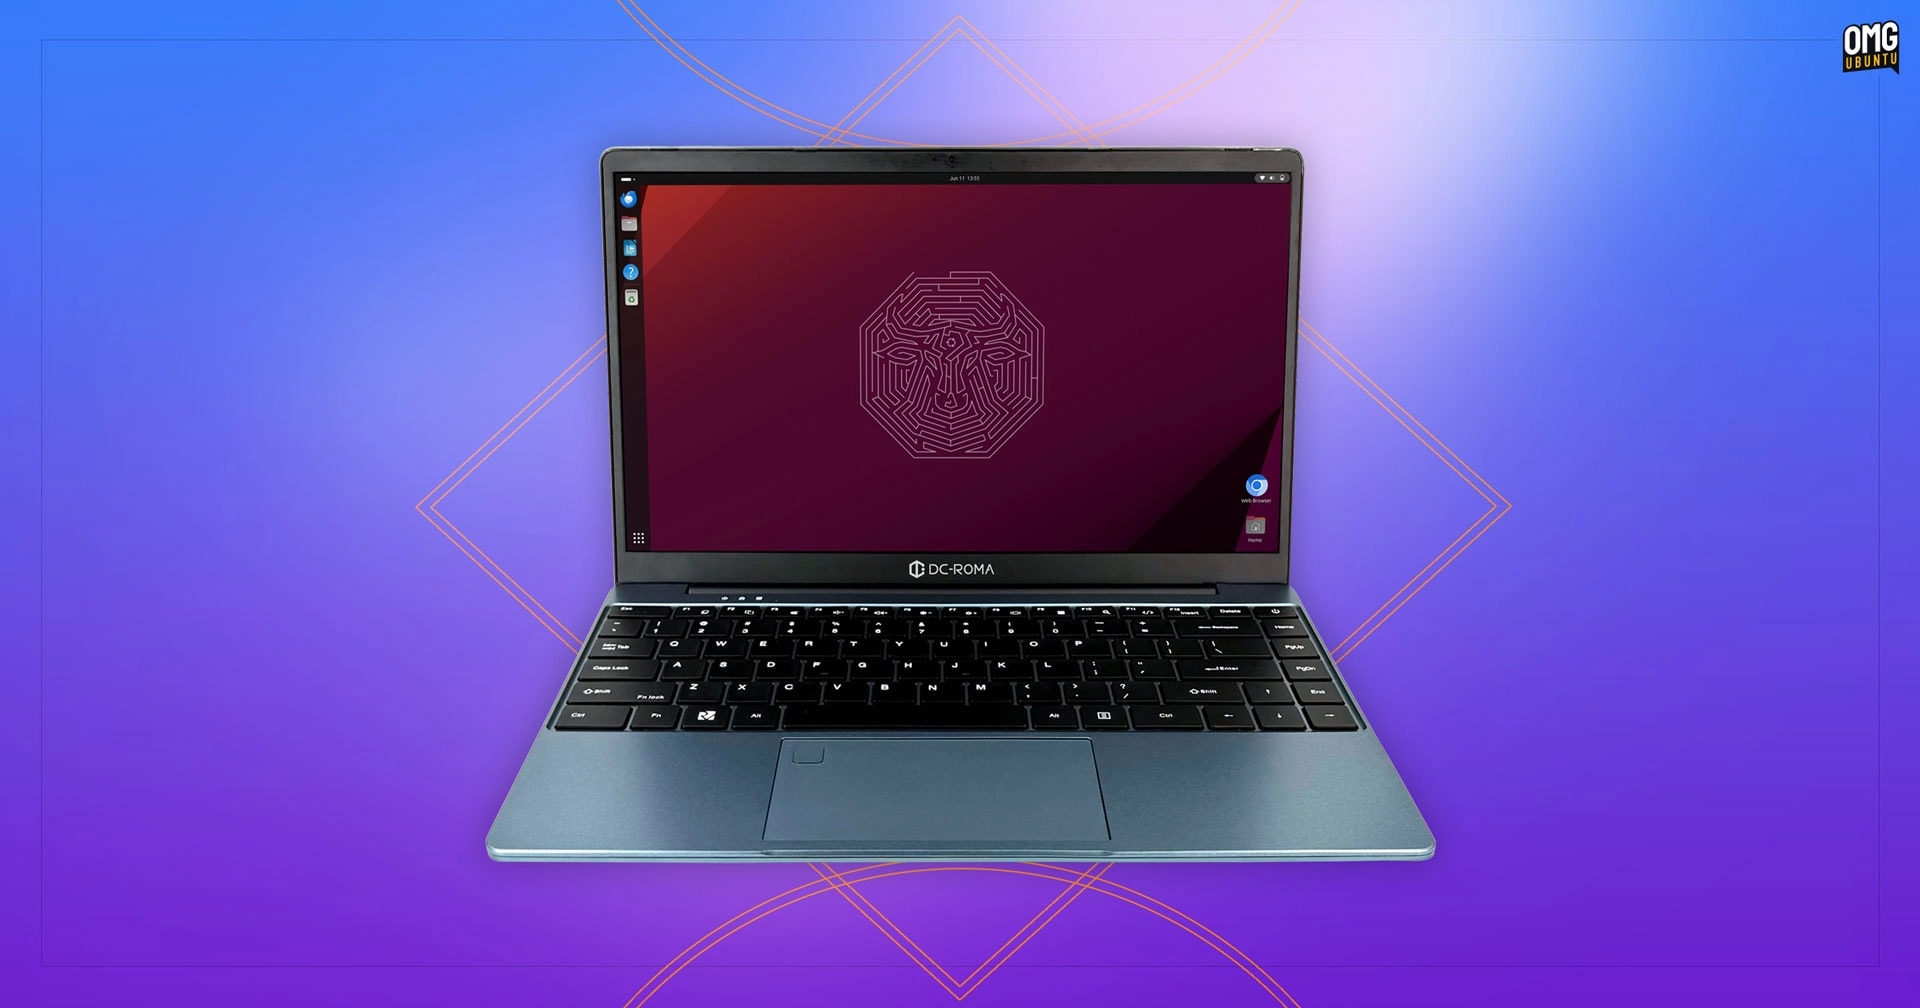 Introducing the World’s First RISC-V Laptop Powered by Ubuntu